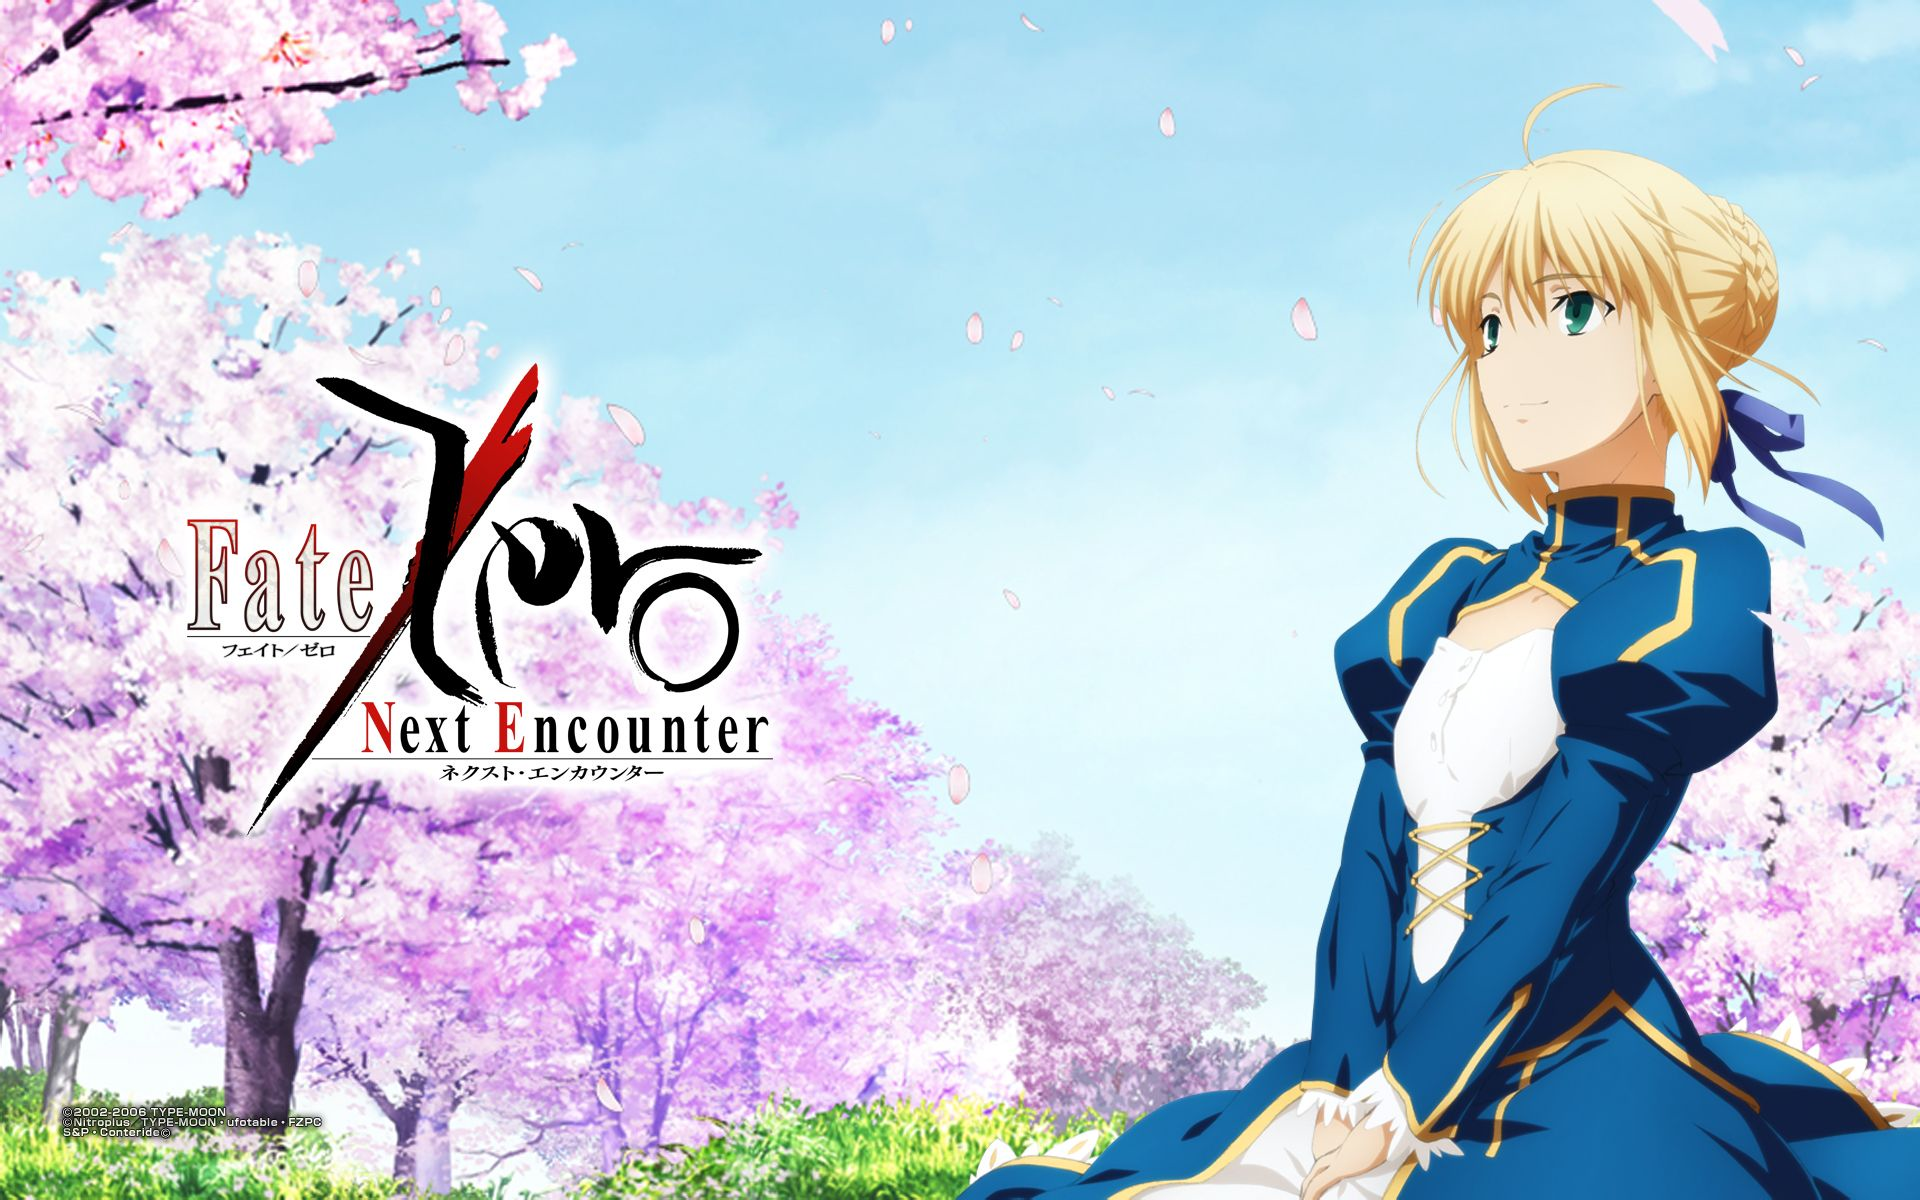 Saber Fate Stay Night Wallpapers - Top Free Saber Fate Stay Night ...